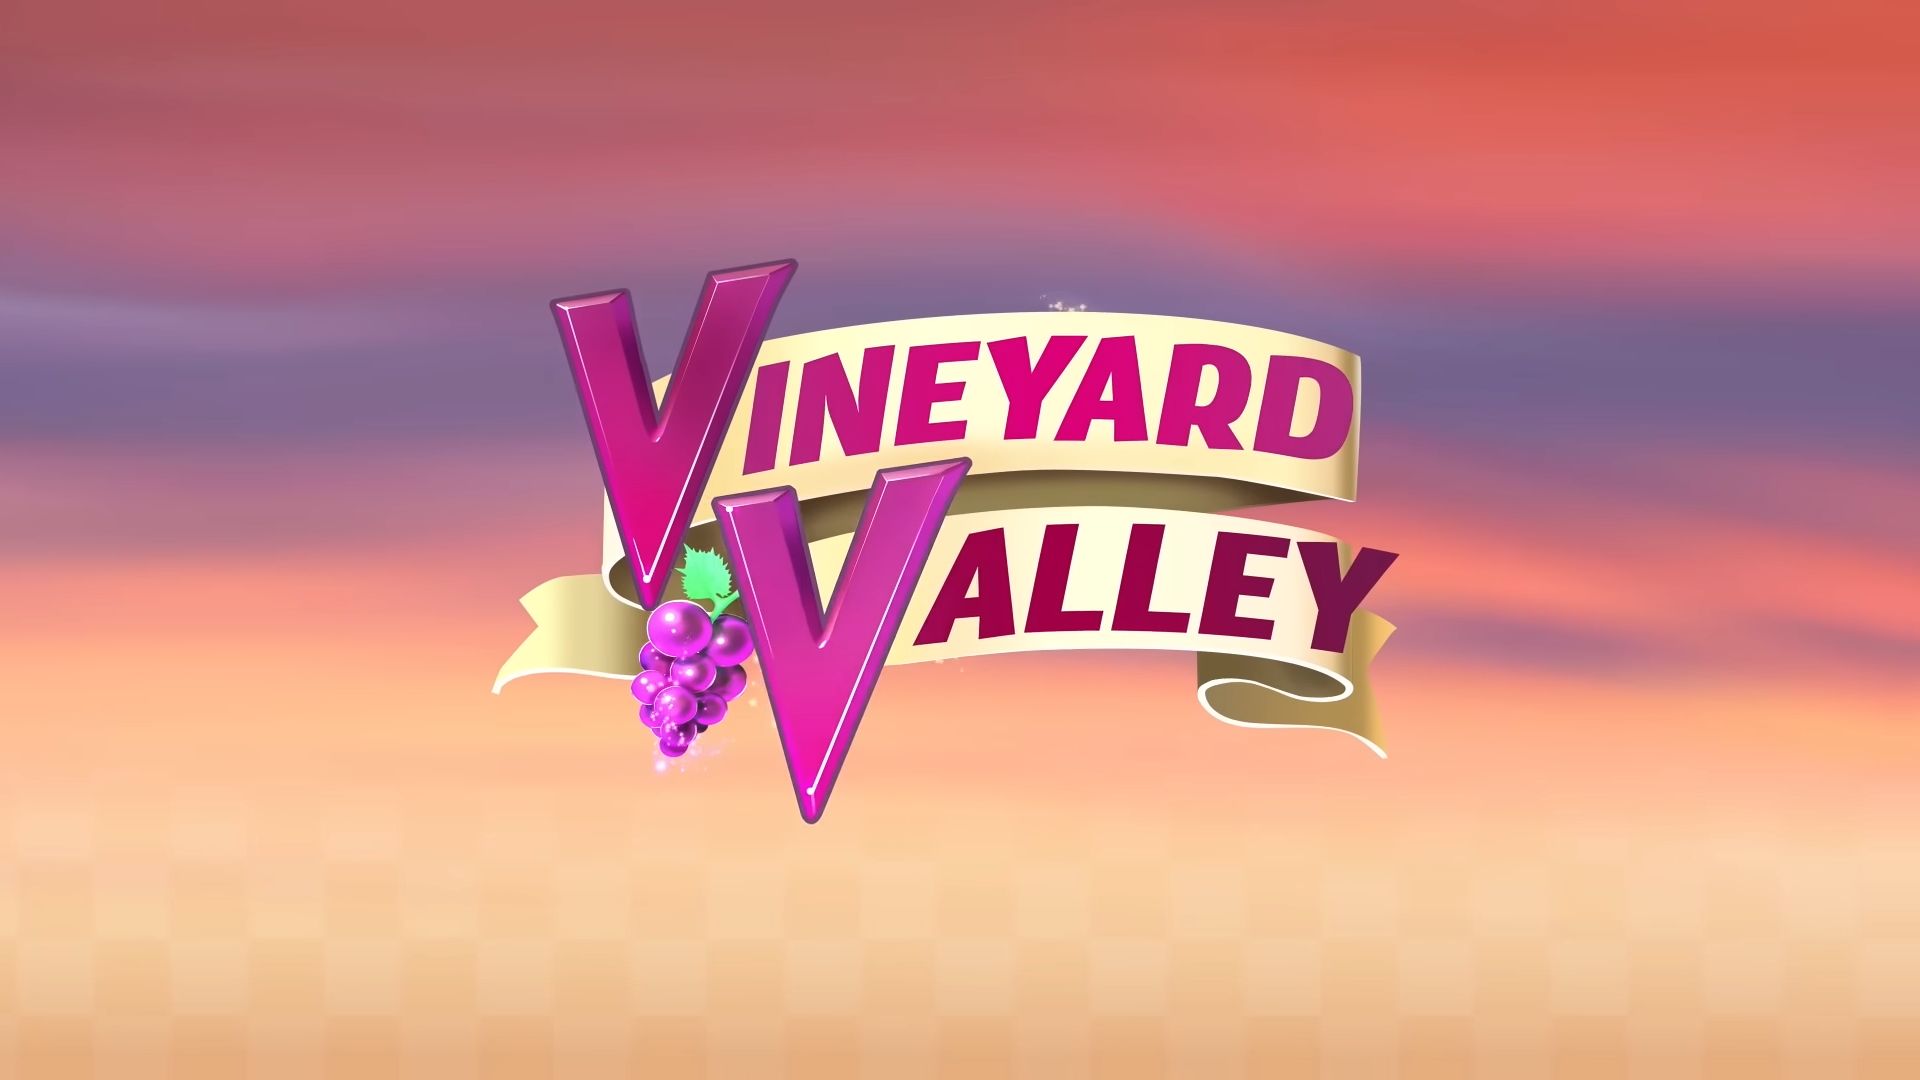 Full version of Android Match 3 game apk Vineyard Valley NETFLIX for tablet and phone.